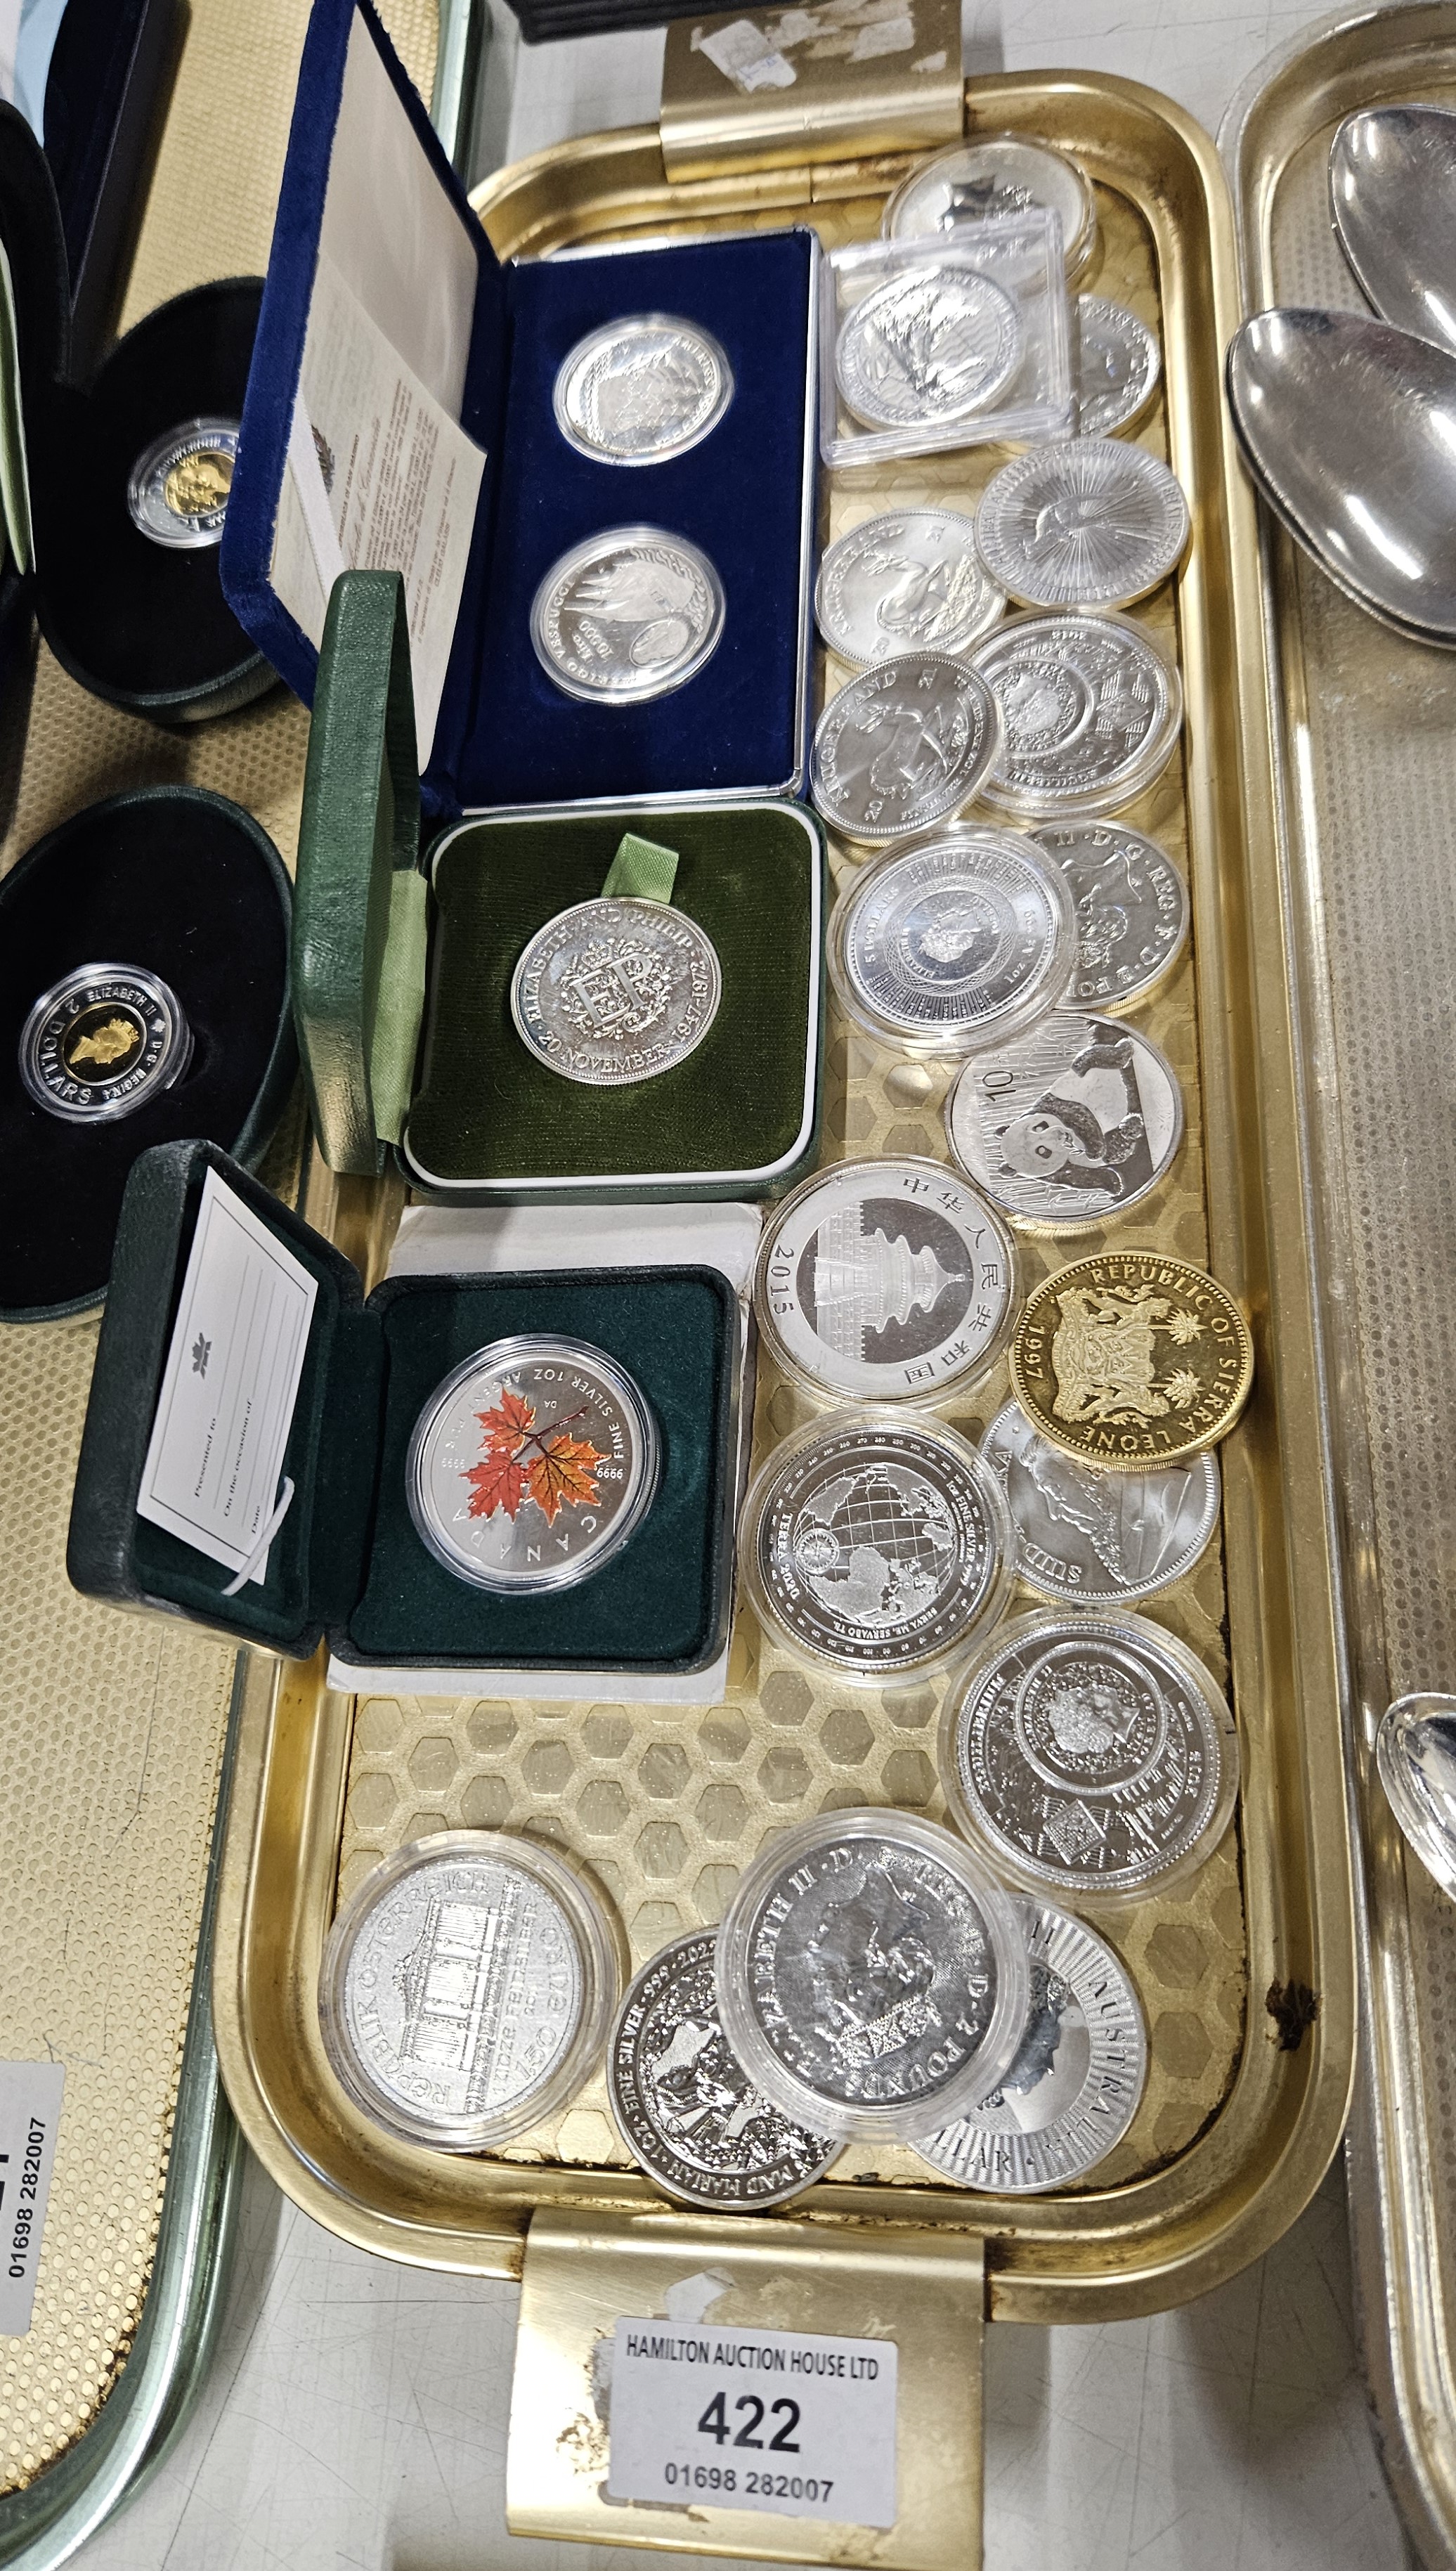 QUANTTIY OF SILVER PROOF COINS APPROX 22 COINS, COMBINED WEIGHT ESTIMATED 741 GRAMS